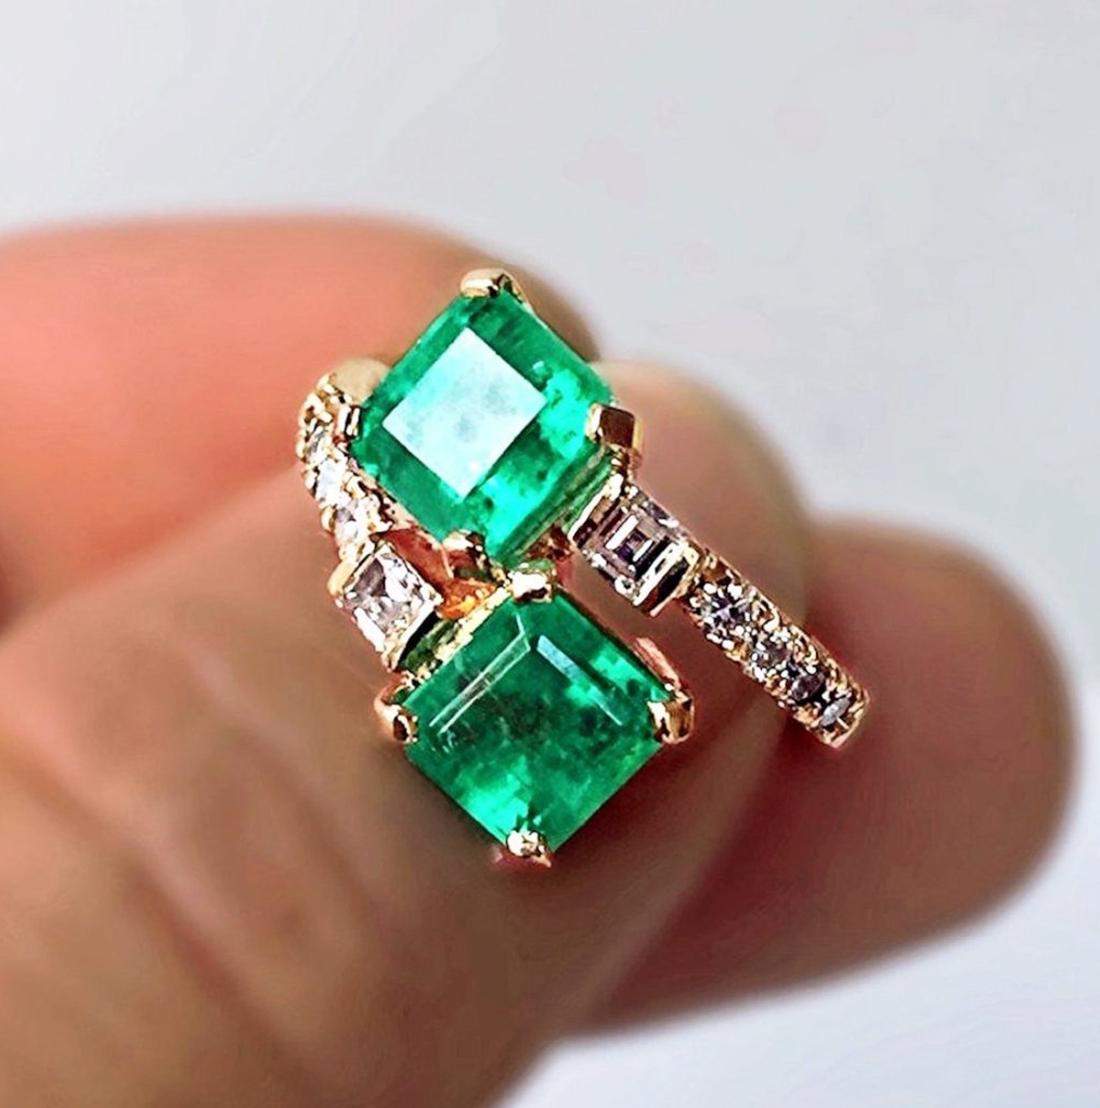 Stunning Natural Colombian Emerald Square Cut, Medium Fine Green Color/Clarity VS, and Natural diamond 